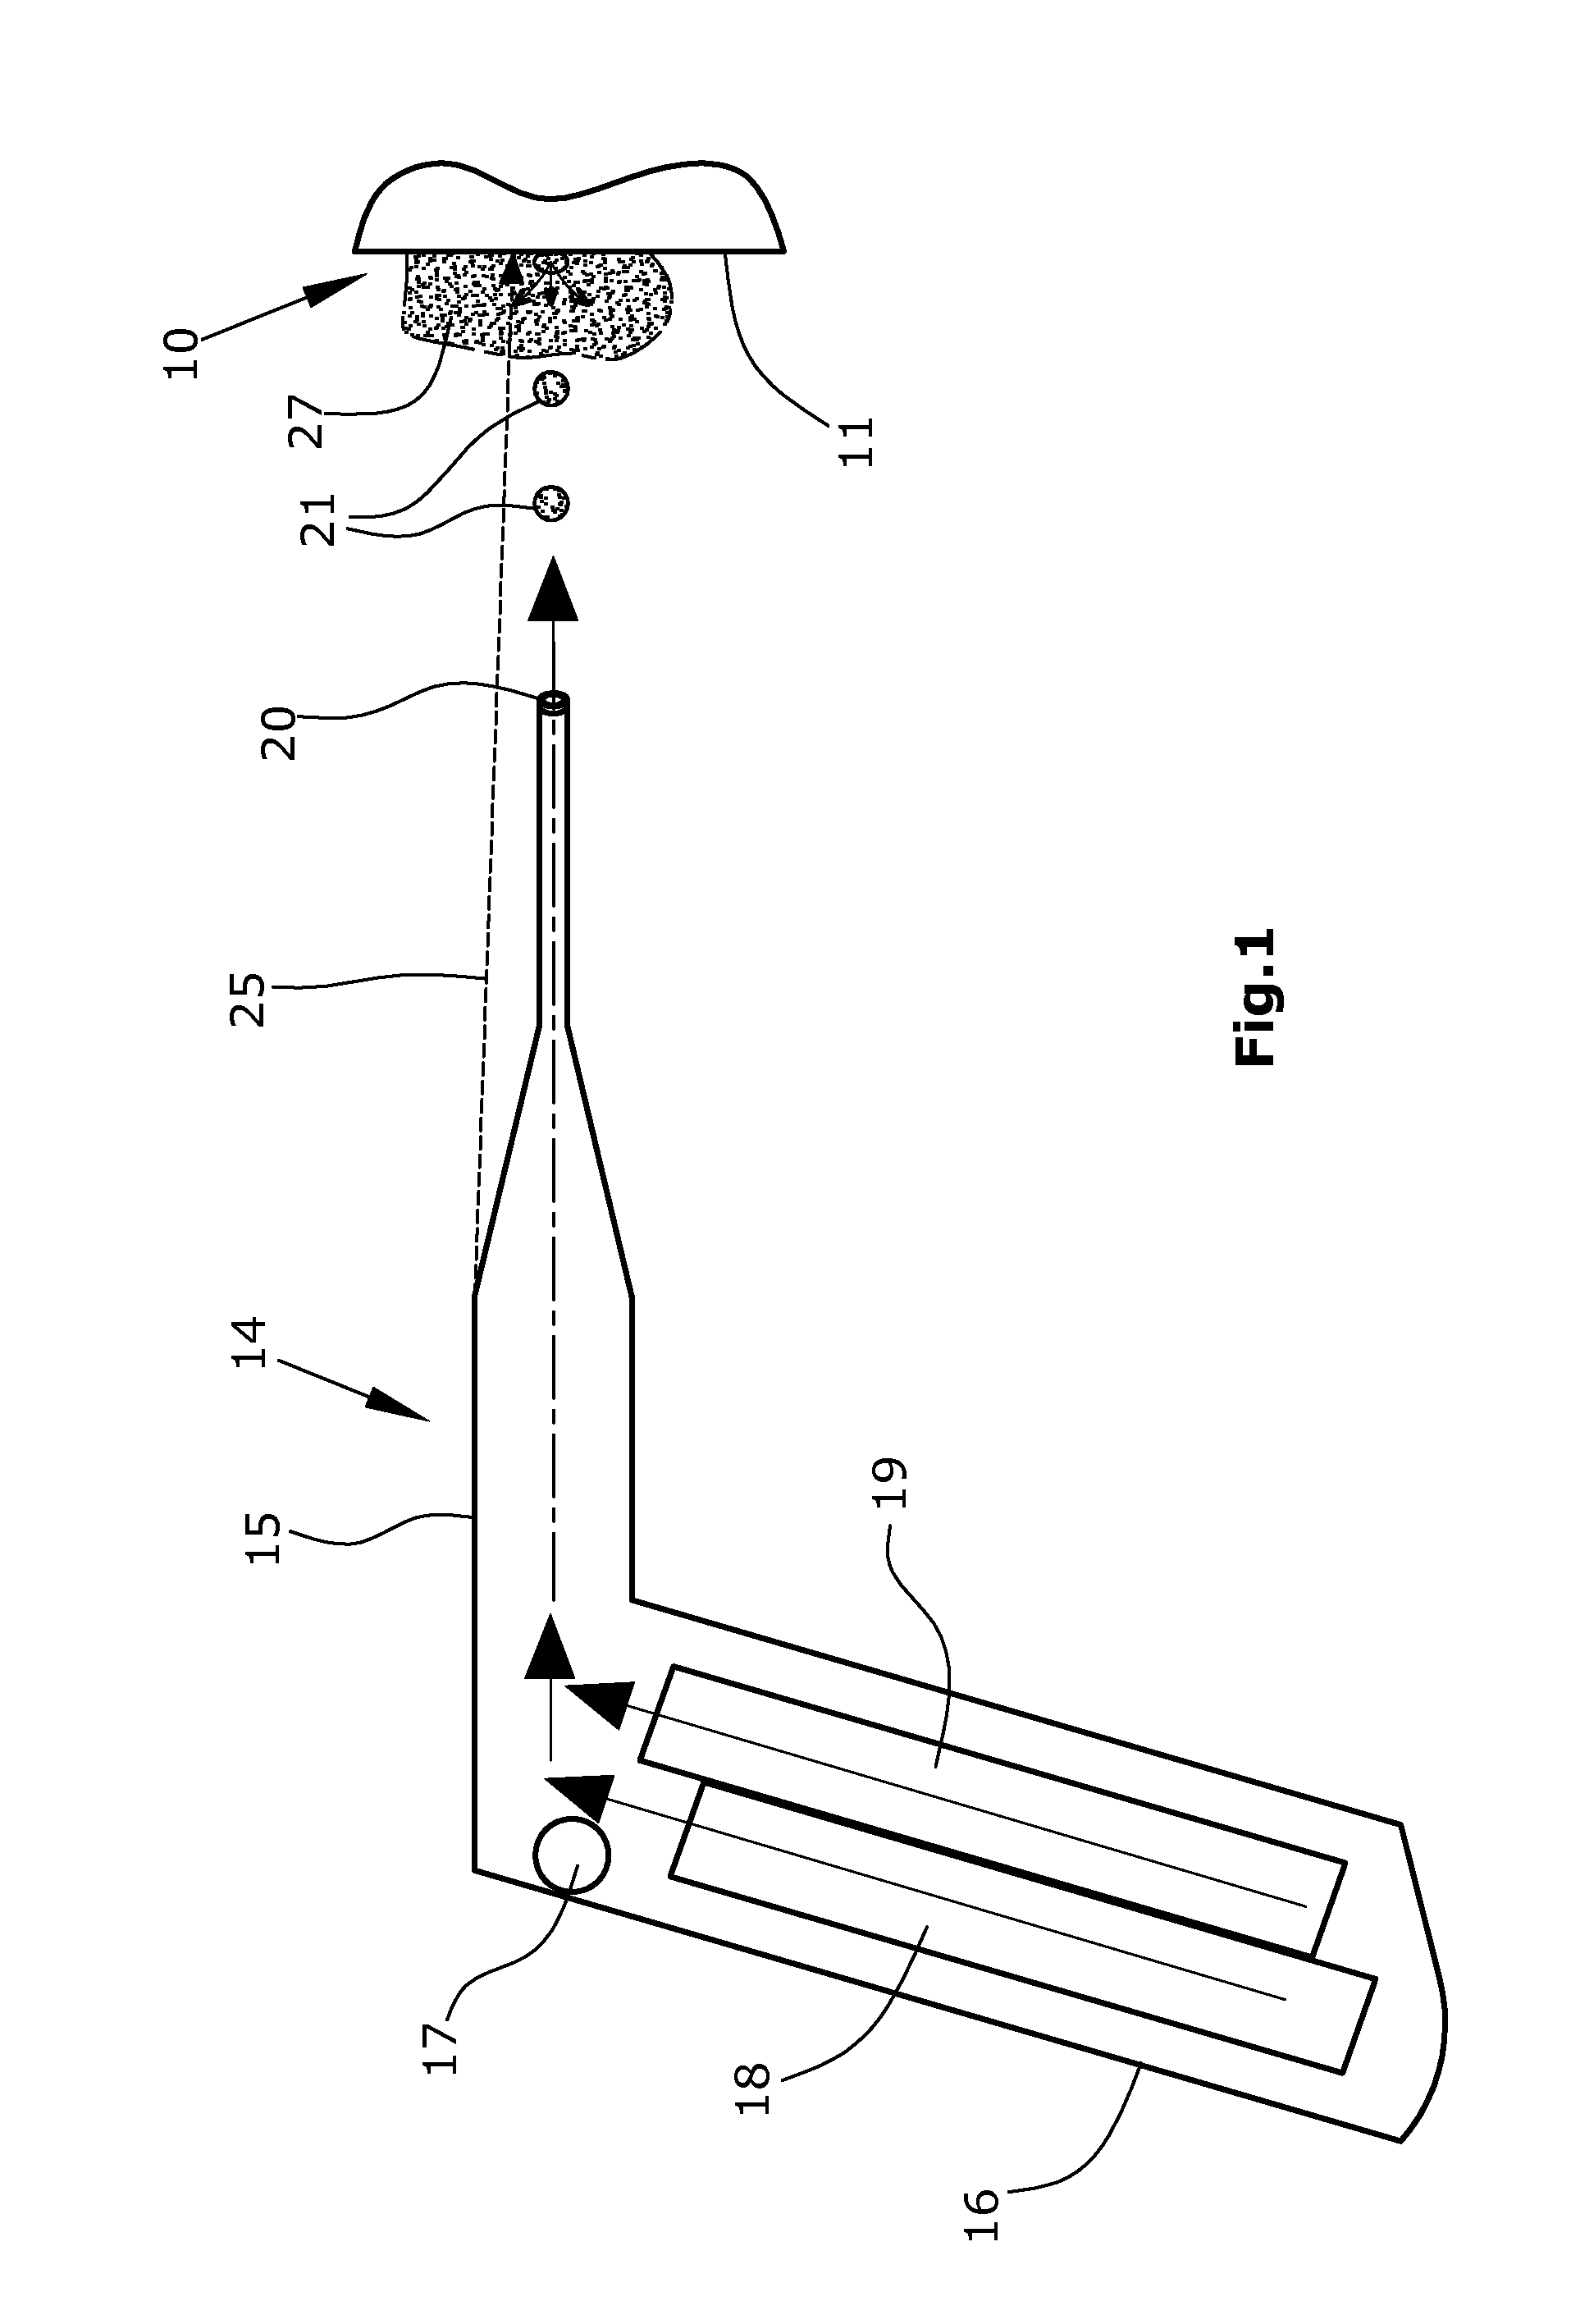 Method for performing a leak test on a test object